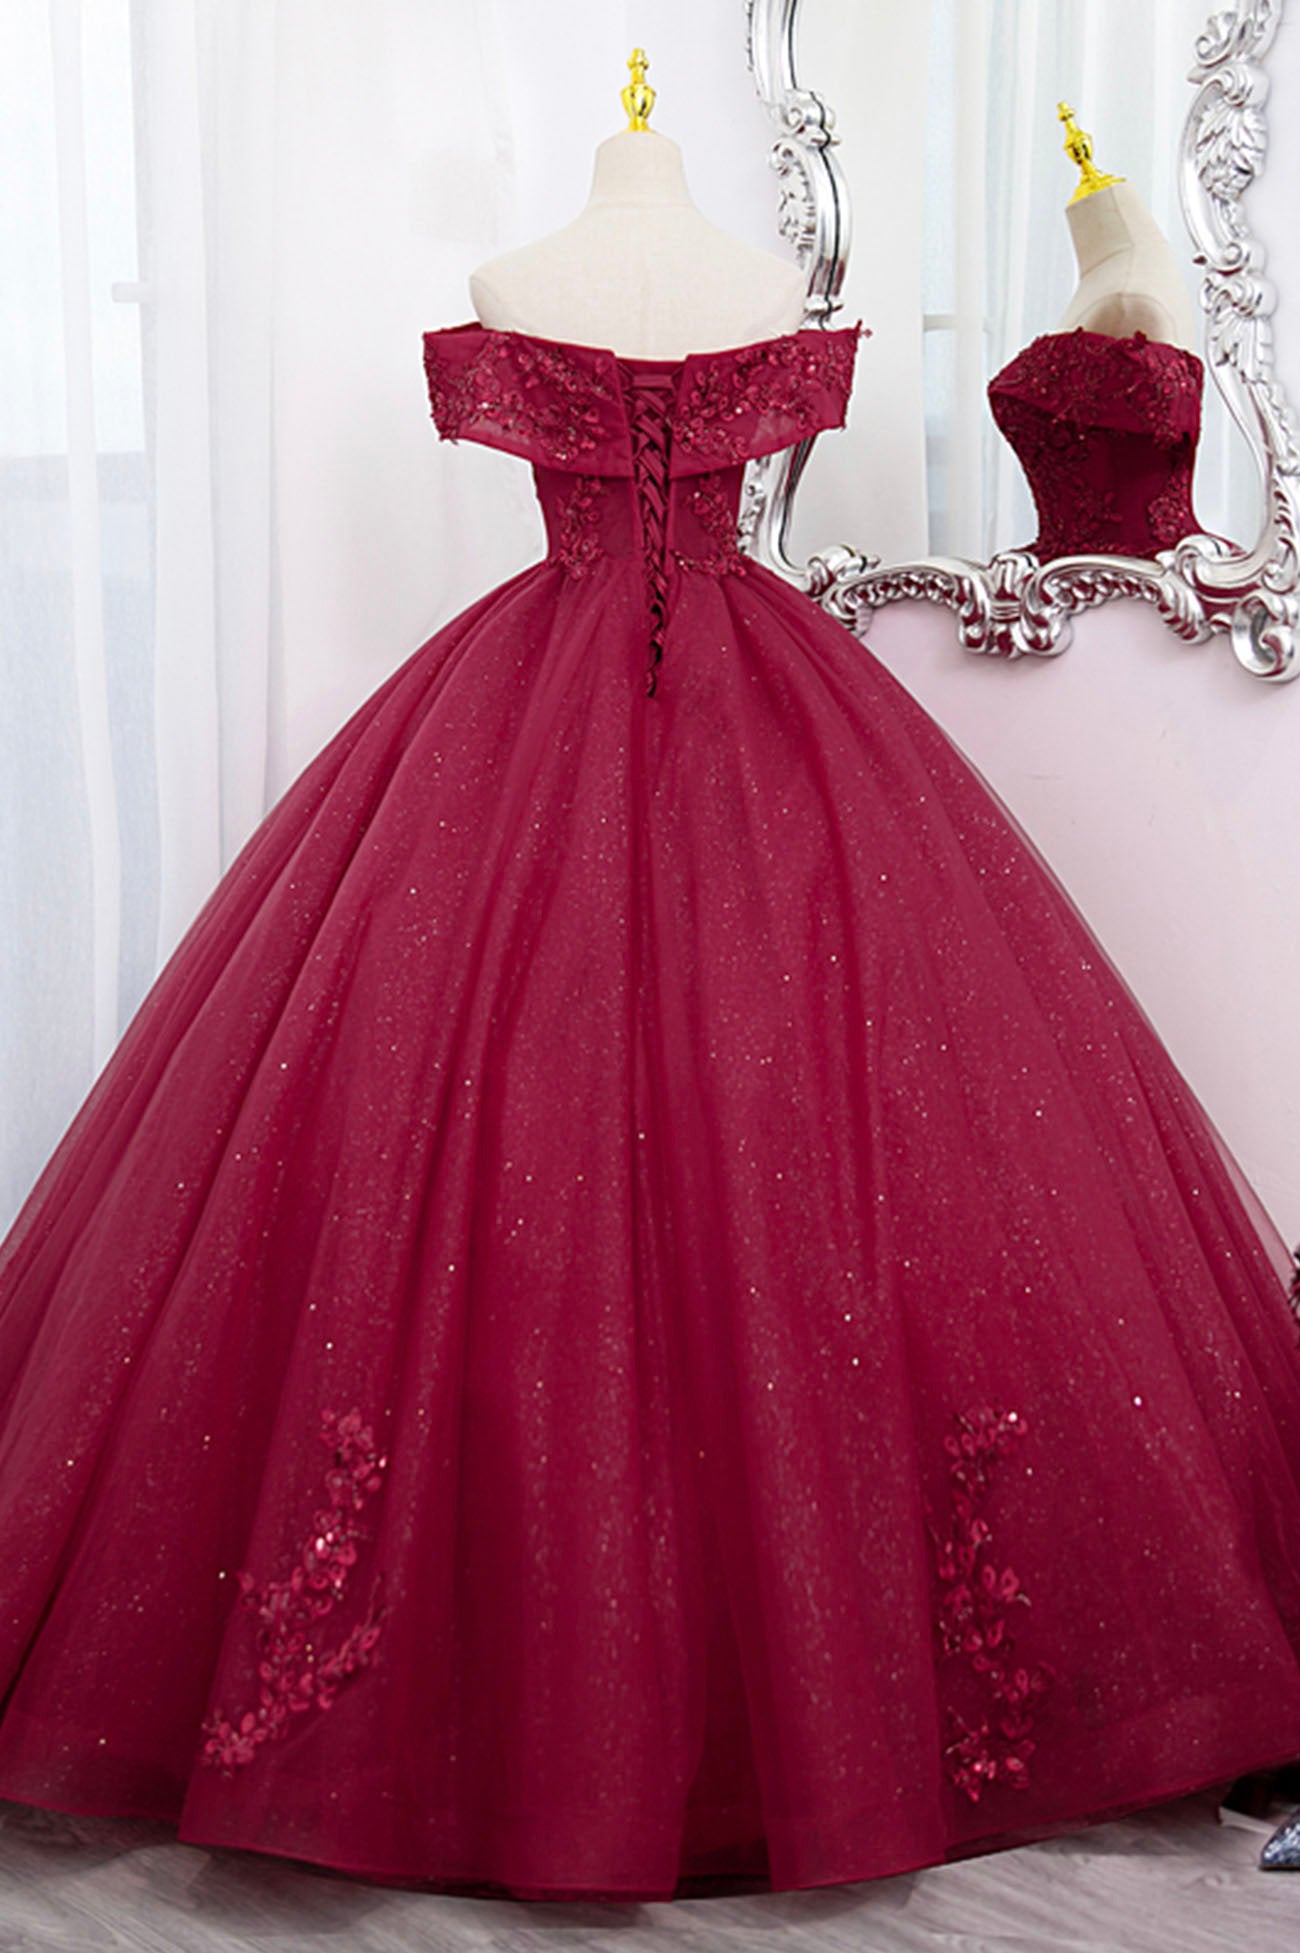 Burgundy Sweet 16 Formal Gown with Lace, Off the Shoulder Prom Dress P